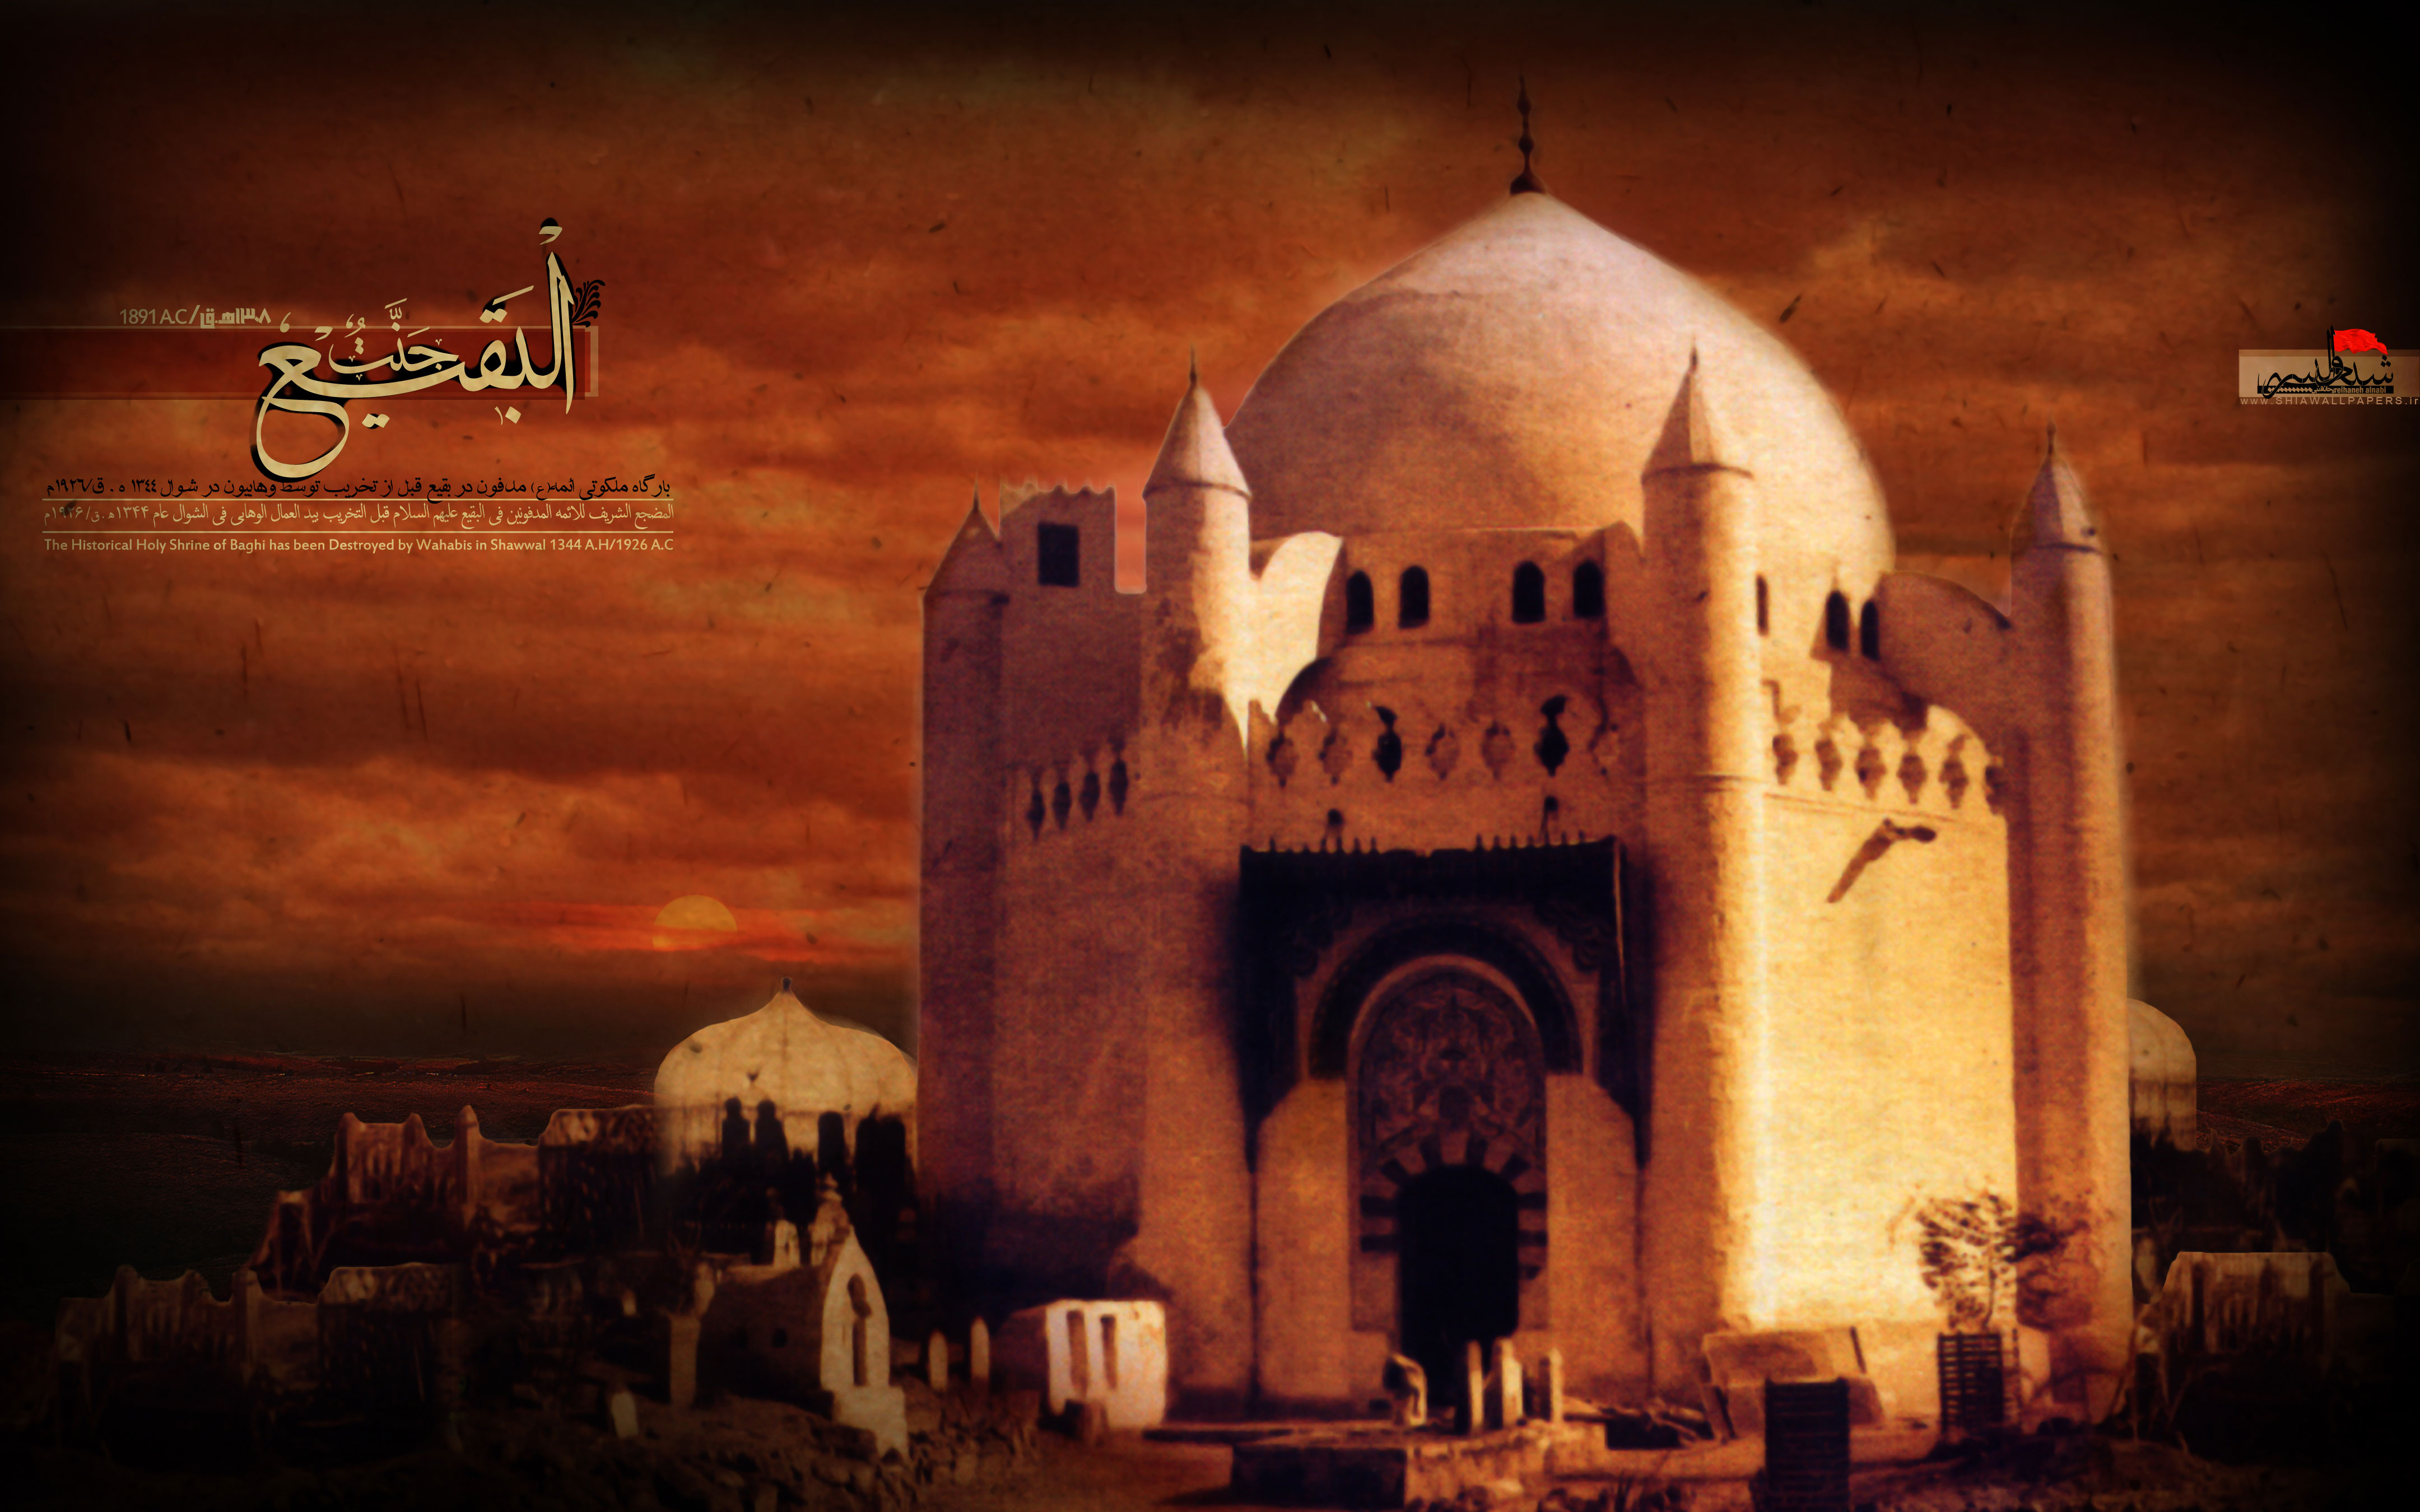 http://shiawallpapers.ir/wp-content/uploads/2010/09/takhrib-baghie-by-Shiawallpapers.jpg